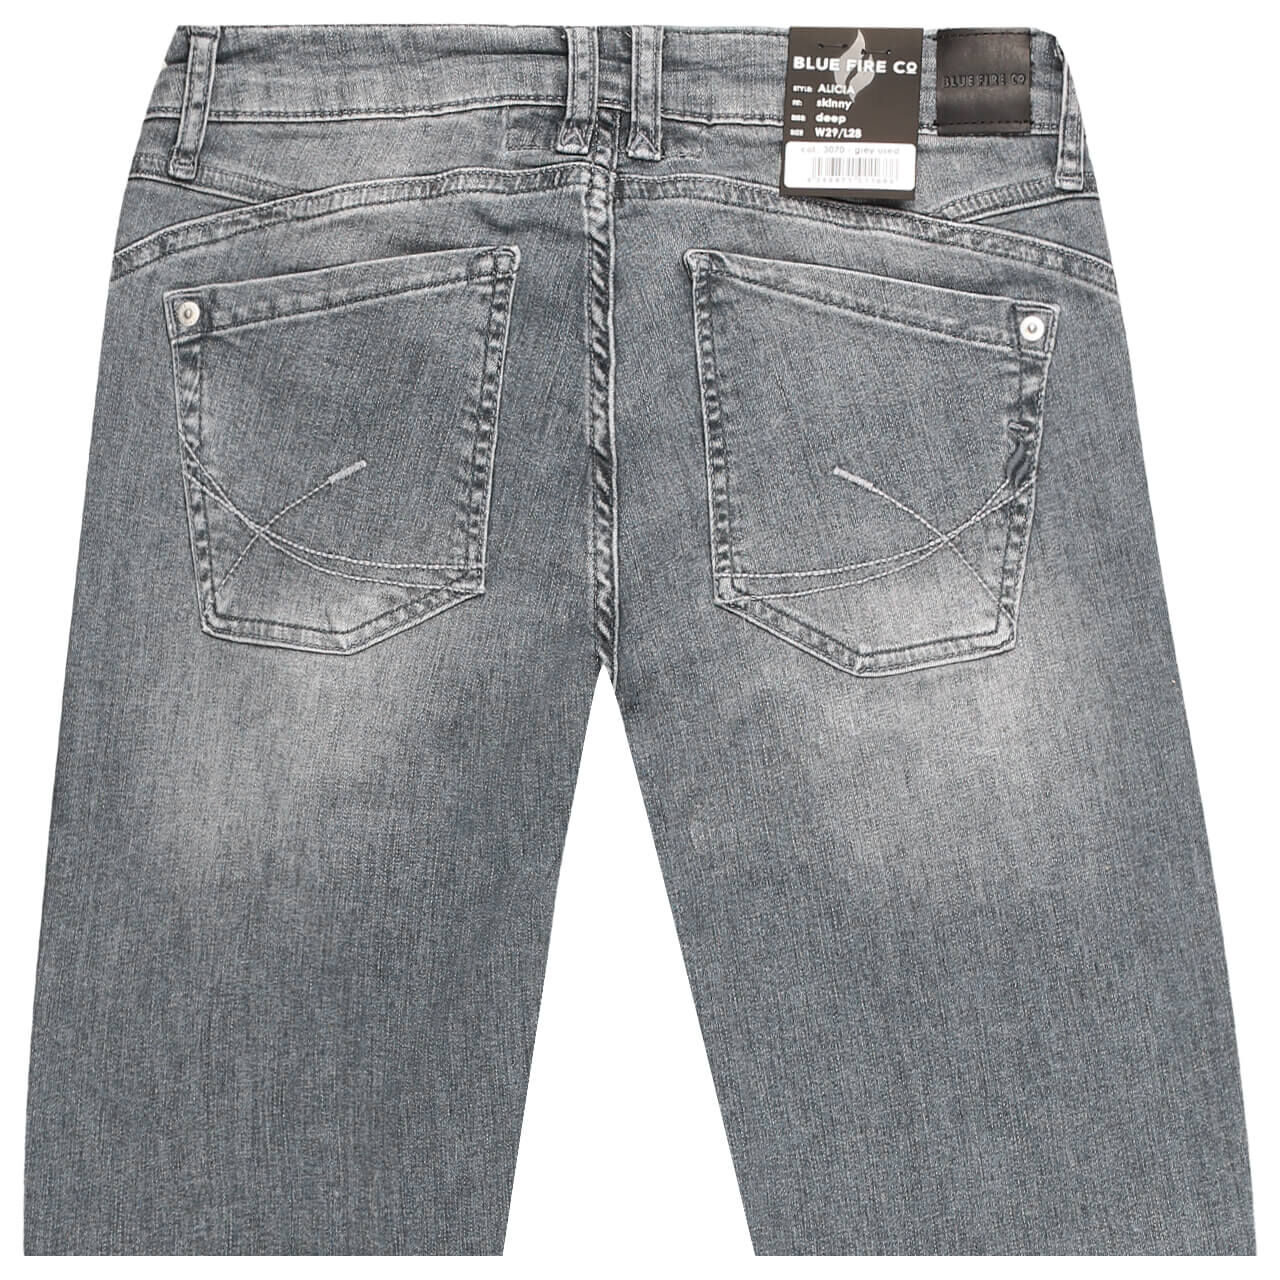 Blue Fire Alicia Jeans grey used